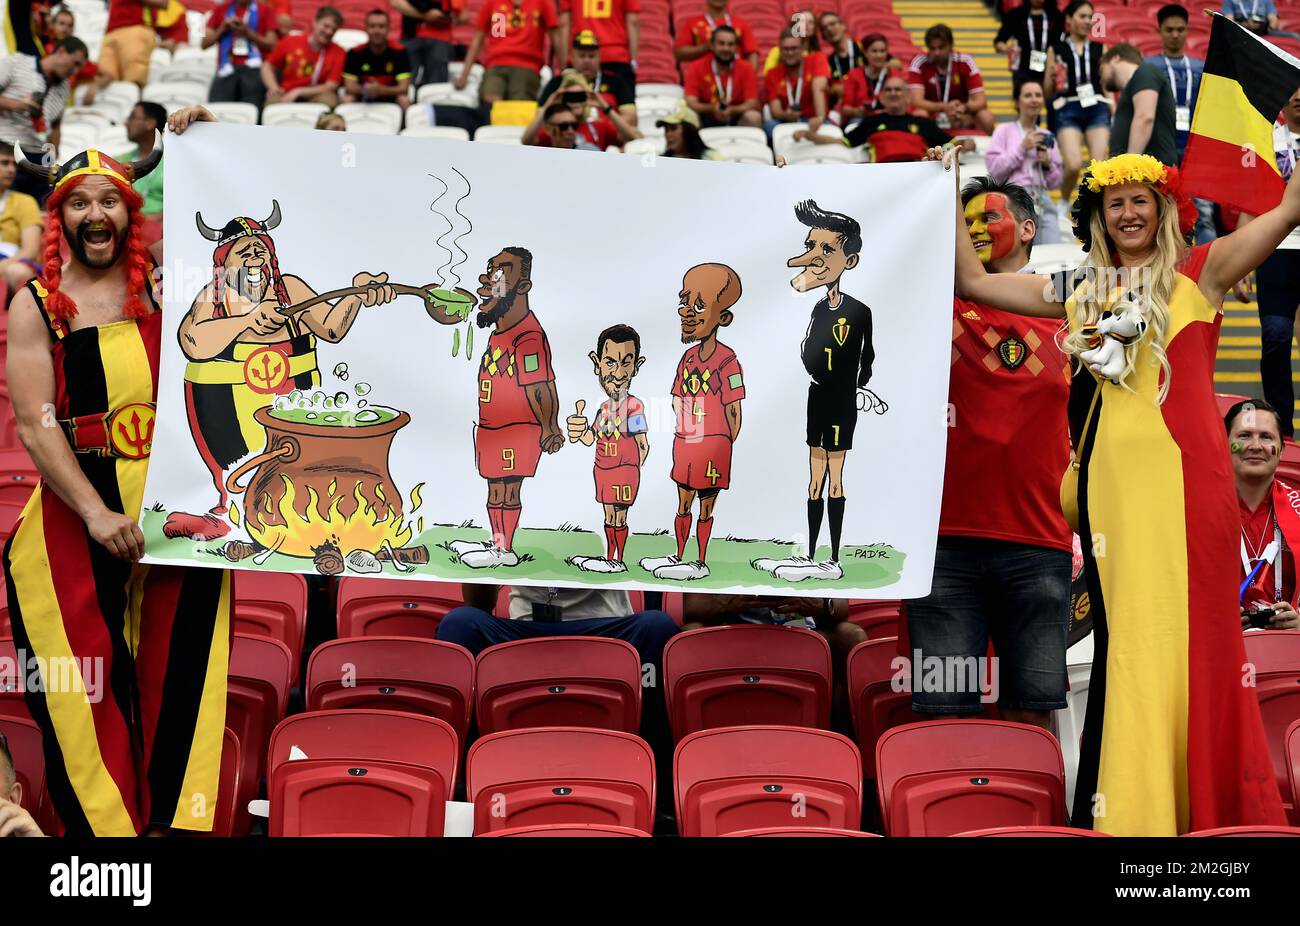 Red devils fan Obelgix Nicolas Dardenne holds a small tifo in the stands ahead of a soccer game between Belgian national soccer team the Red Devils and Brazil in Kazan, Russia, Friday 06 July 2018, the quarter-finals of the 2018 FIFA World Cup. BELGA PHOTO DIRK WAEM  Stock Photo